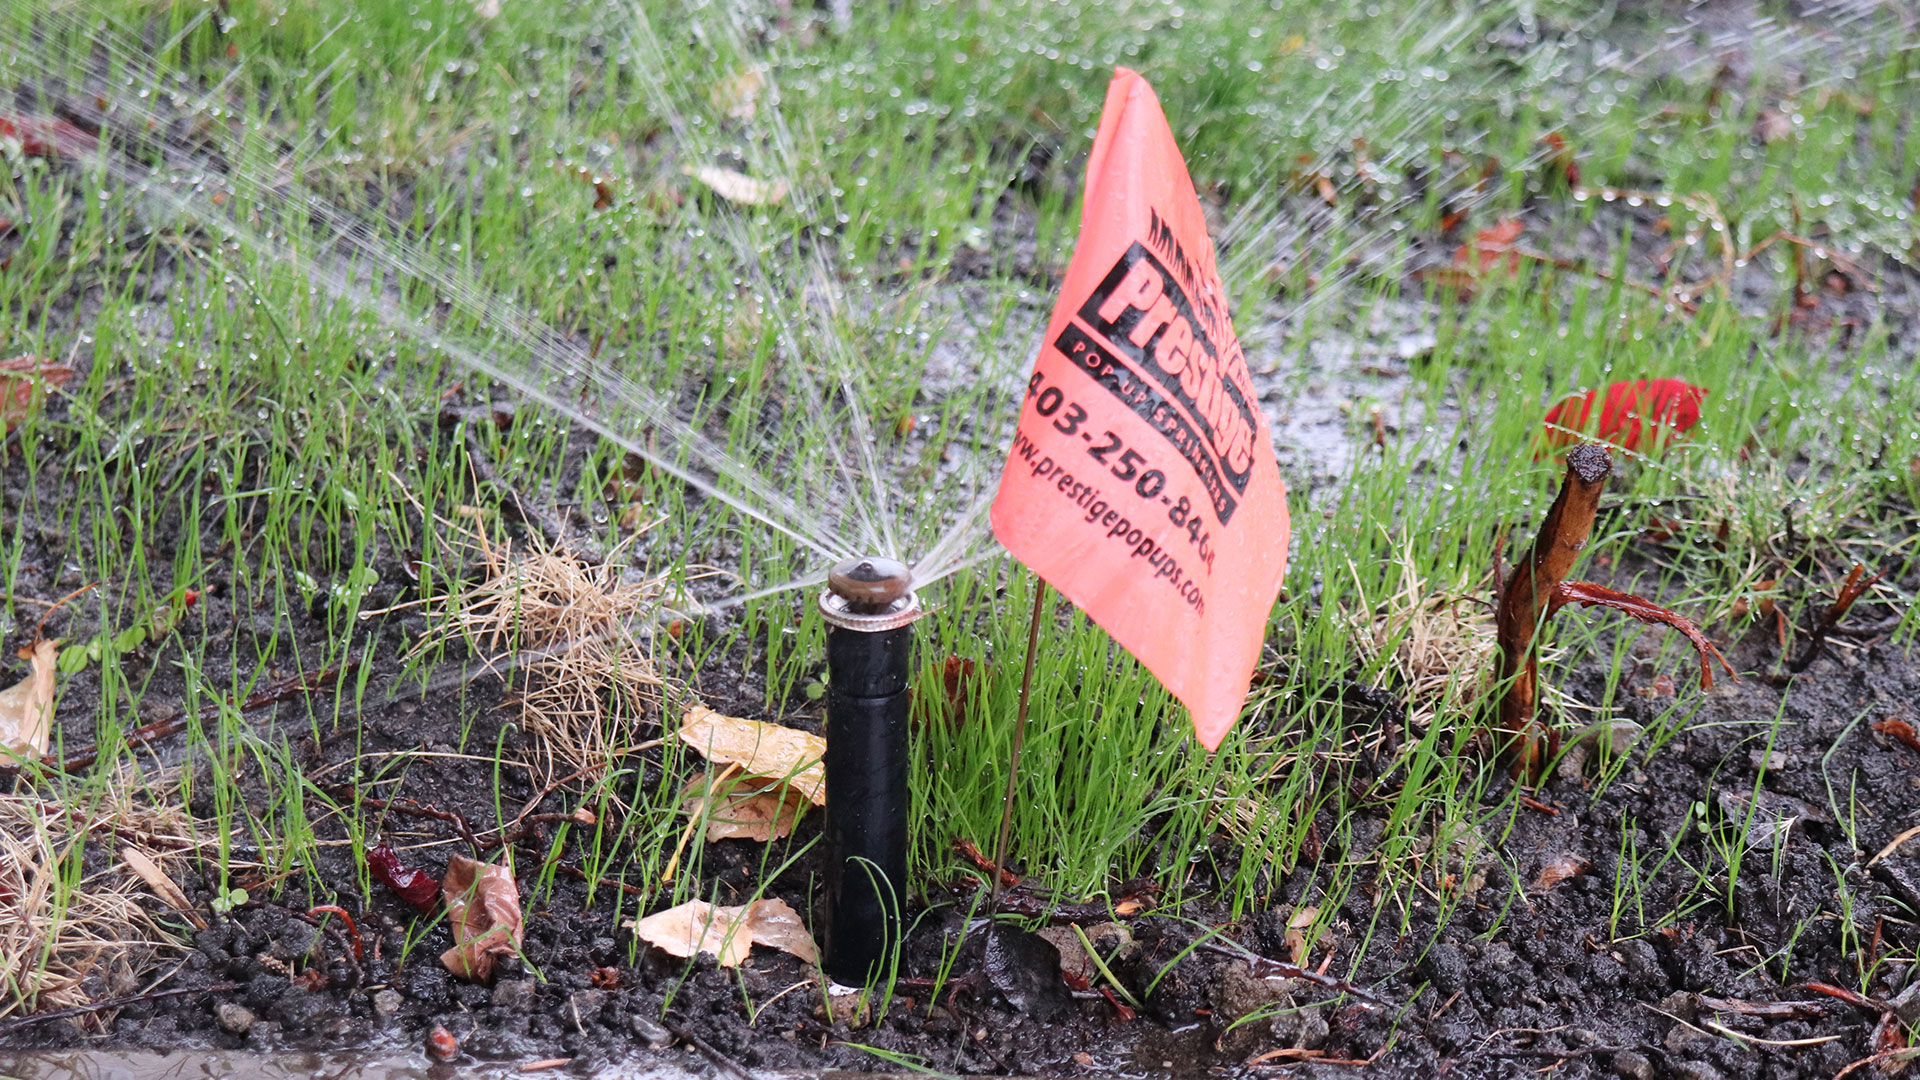 Irrigation system flagged for winterization by professionals in Altadore, AB.